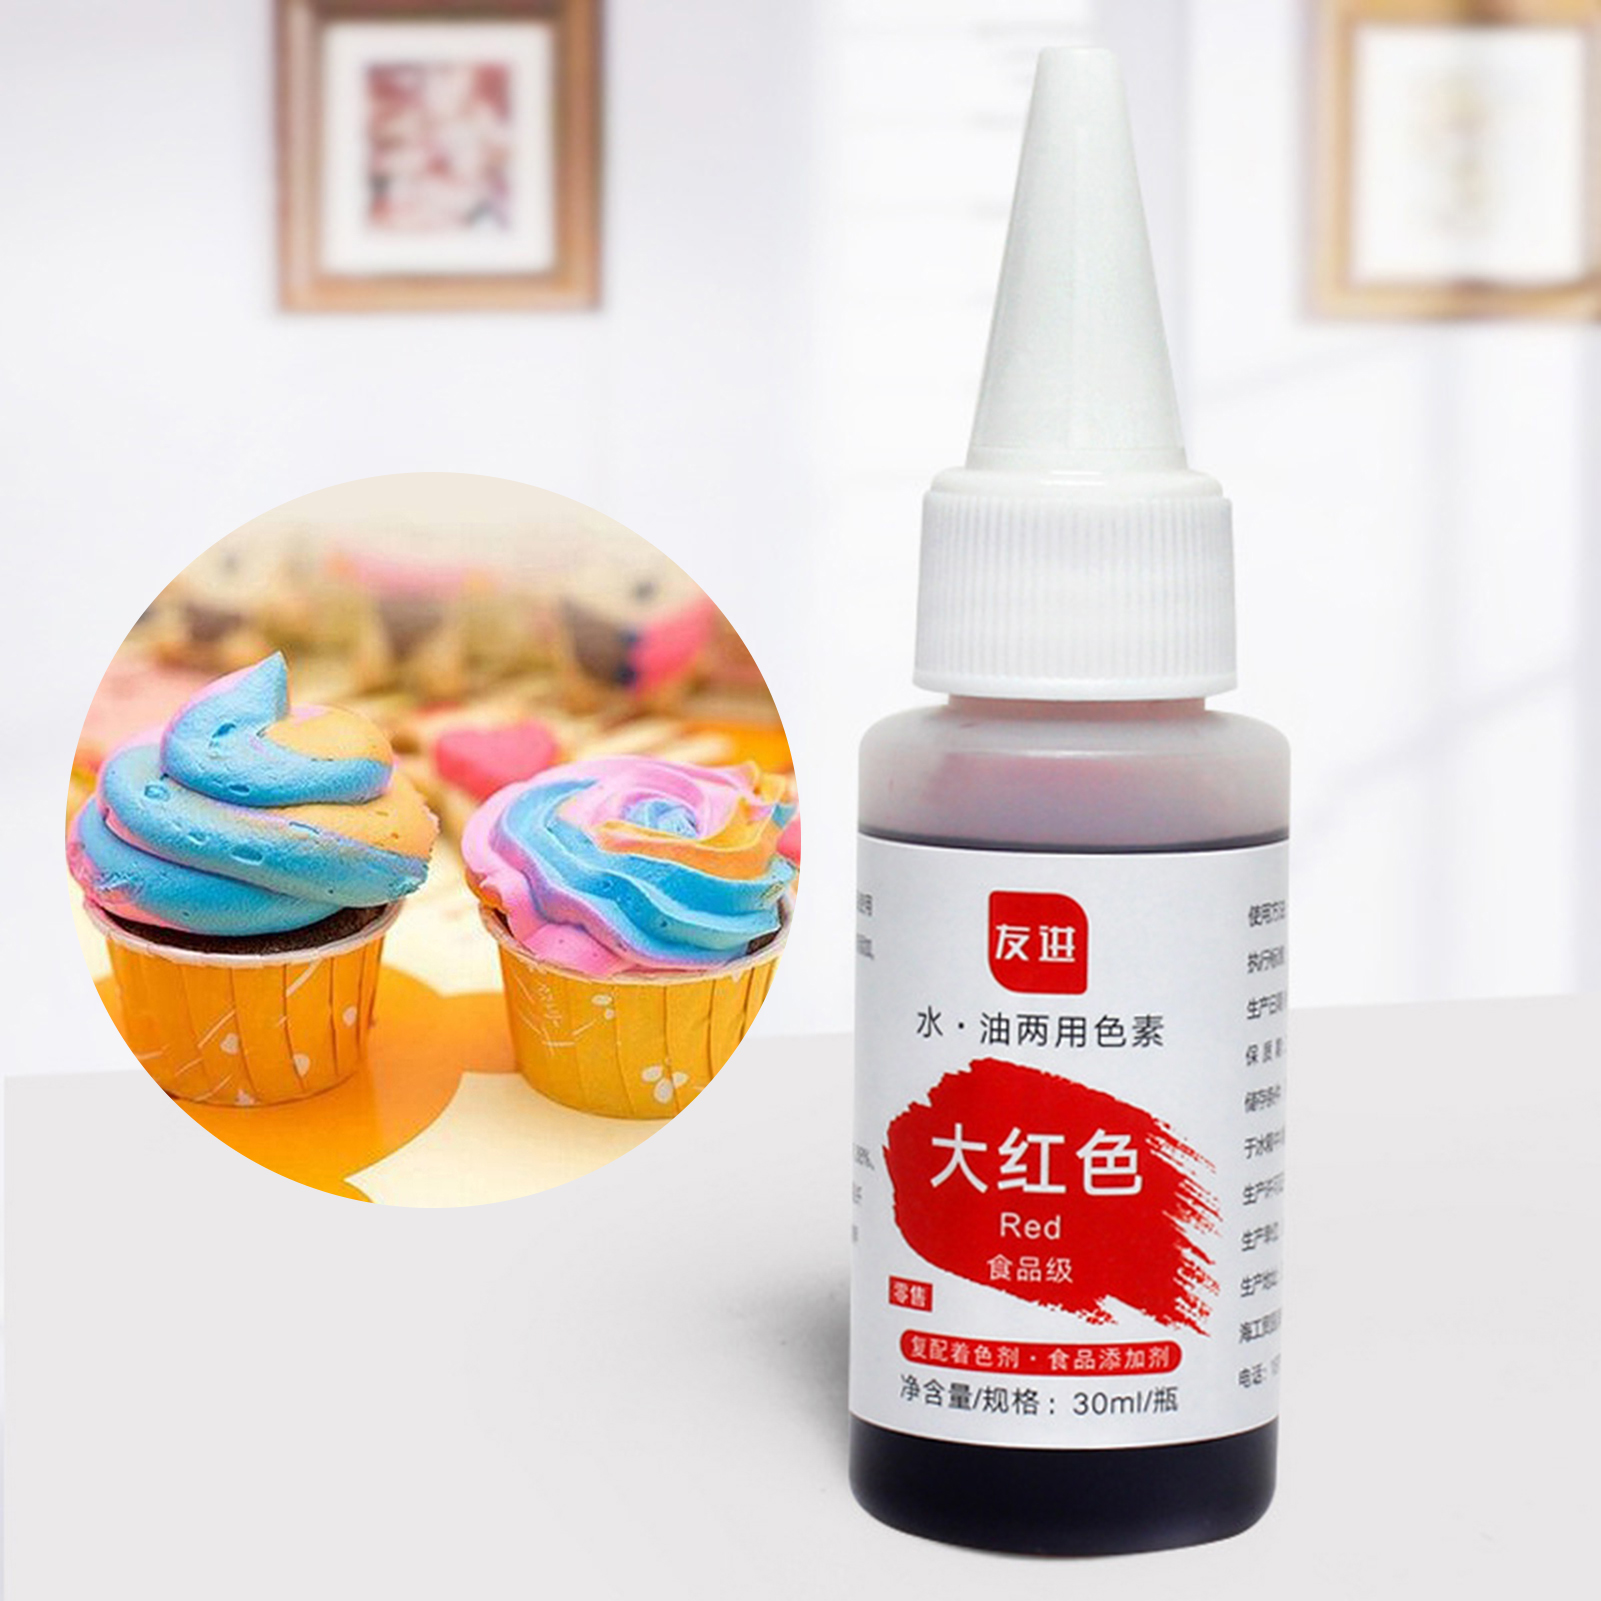 Ximi 1 Bottle 30ml Coloring Matter Synthetic Versatile Dissolved Liquid Food Coloring Pigment Ingredient Household Supplies, Black